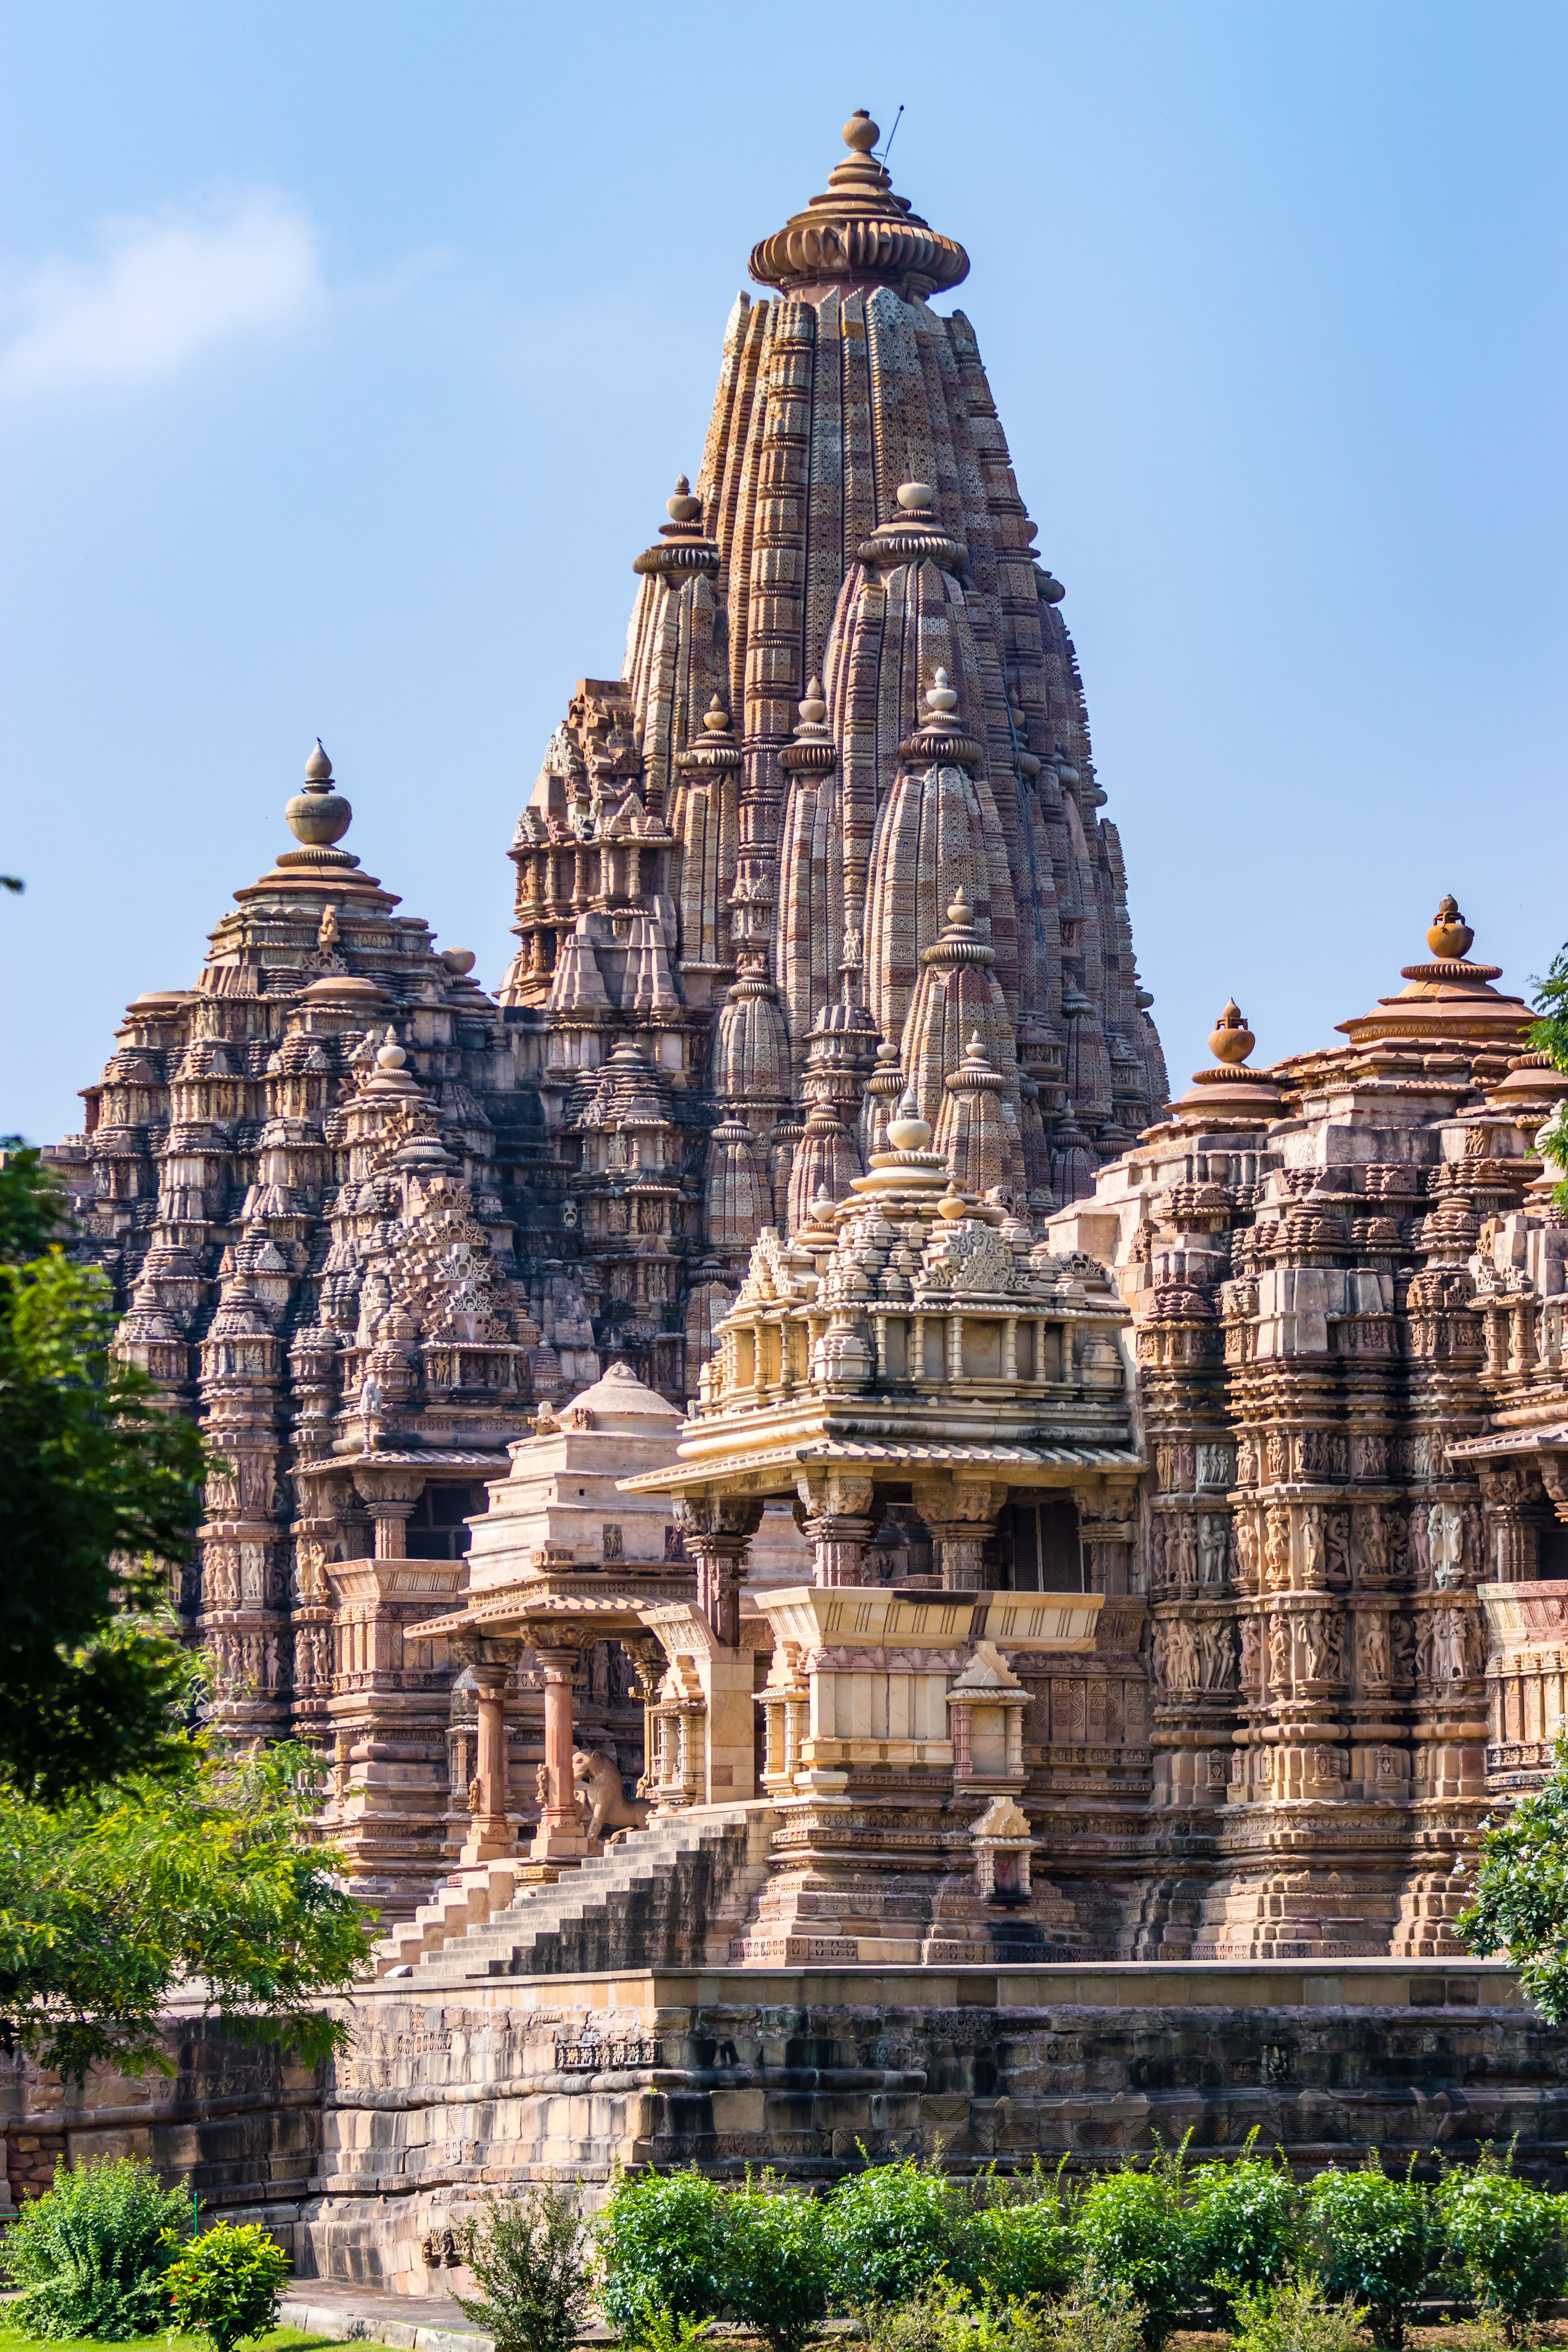 The Khajuraho Group of Monuments is a group of Hindu temples in Chhatarpur district, Madhya Pradesh, India 